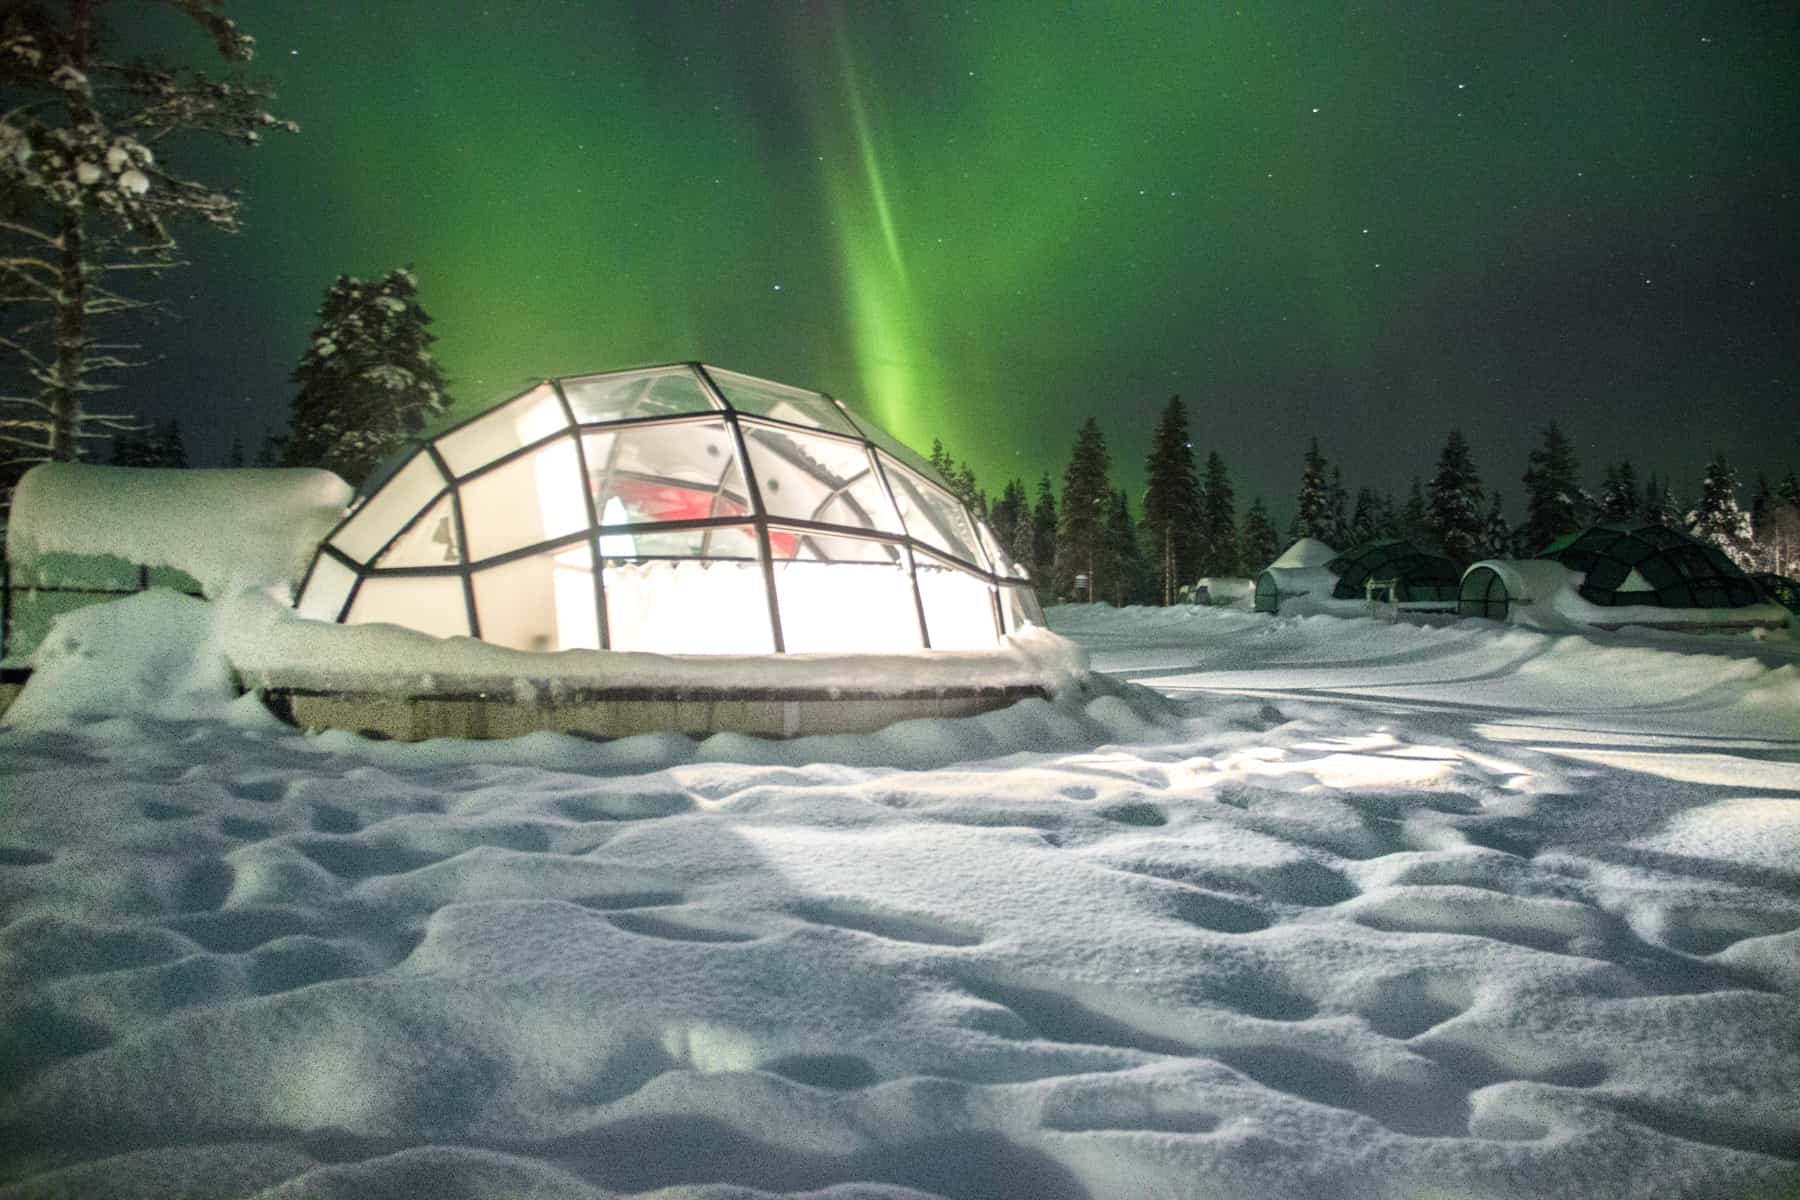 A glass igloo on white snow under the green northern lights in Finland Lapland.